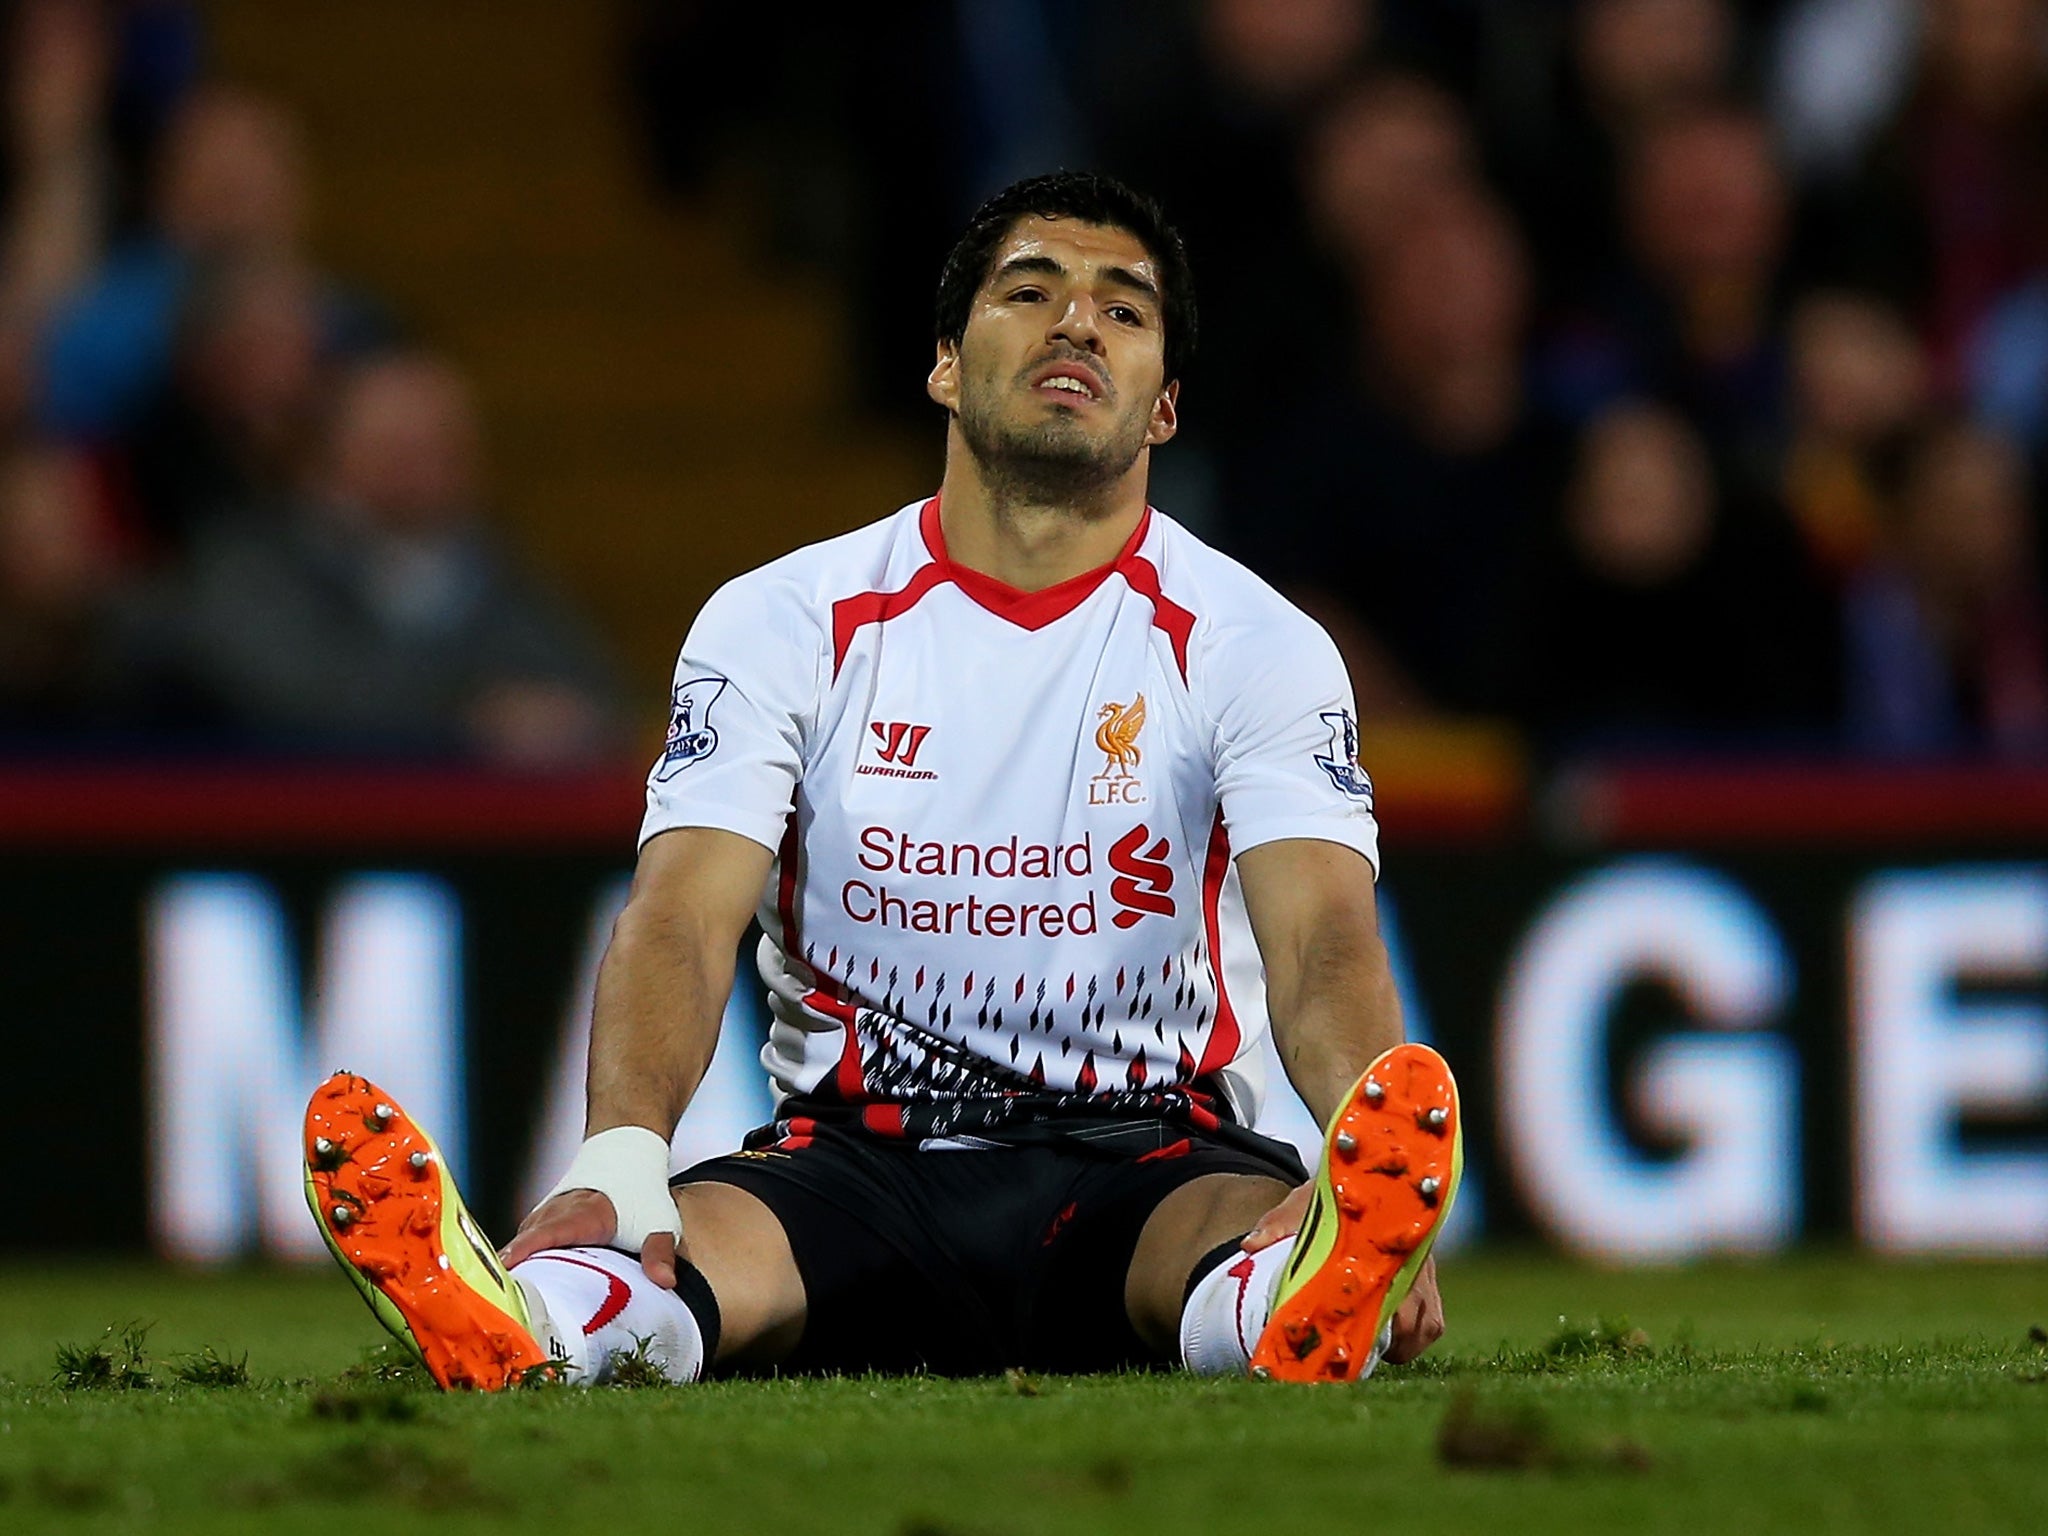 Luis Suarez sits dejected after the draw with Crystal Palace which all but ended Liverpool’s title hopes last season